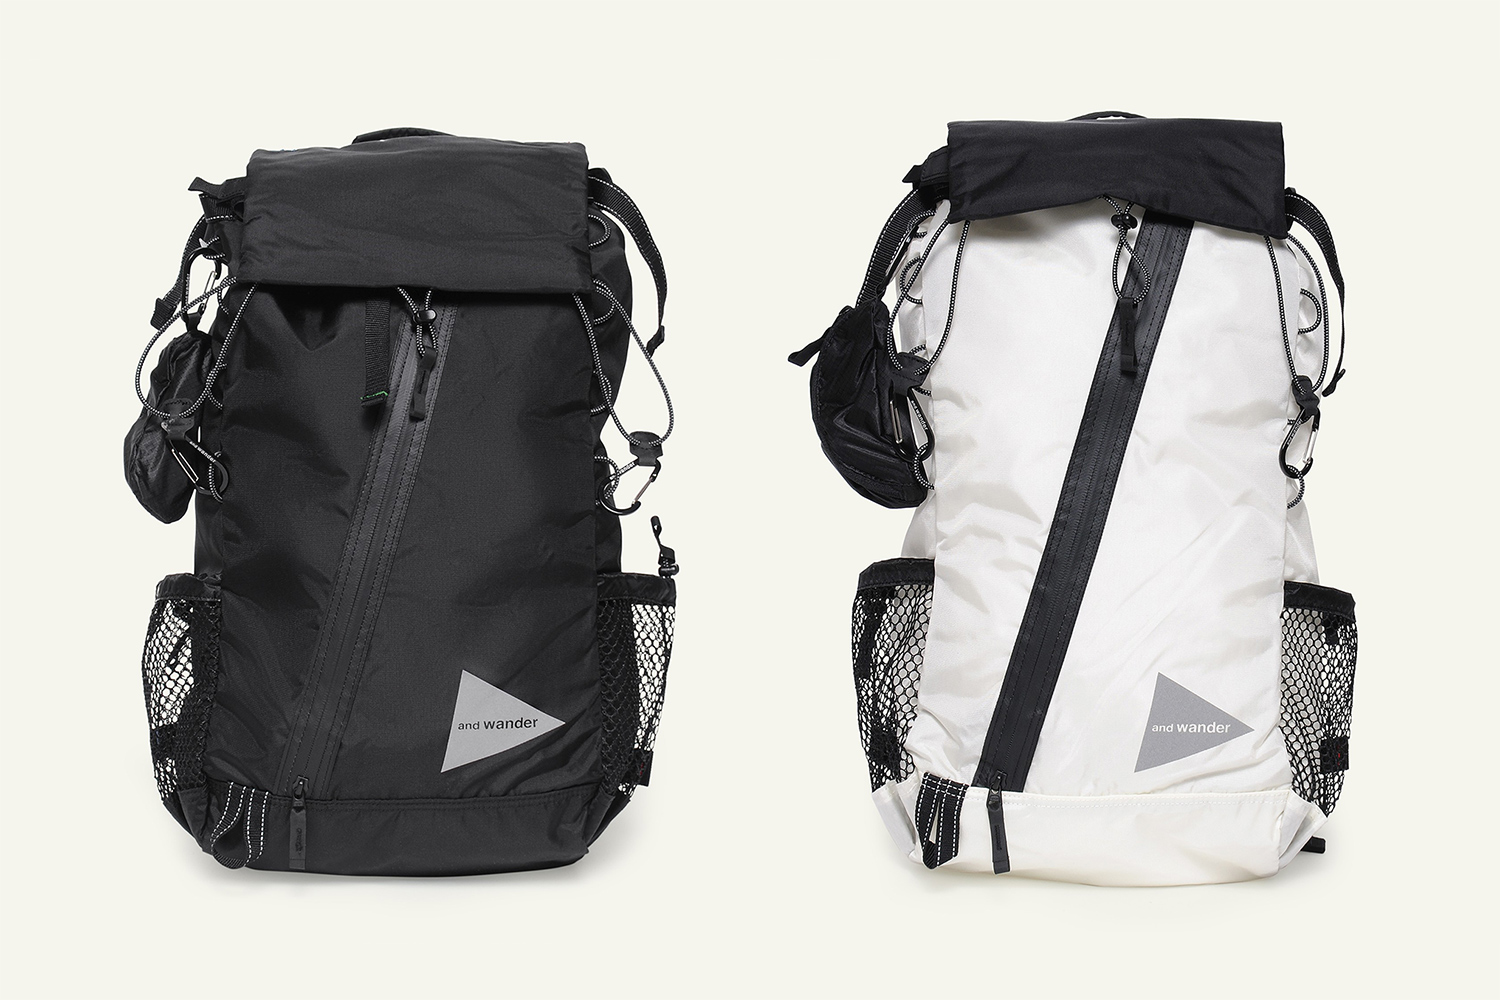 and wander X-Pac 30L backpack 【サイズ交換ＯＫ】 - www